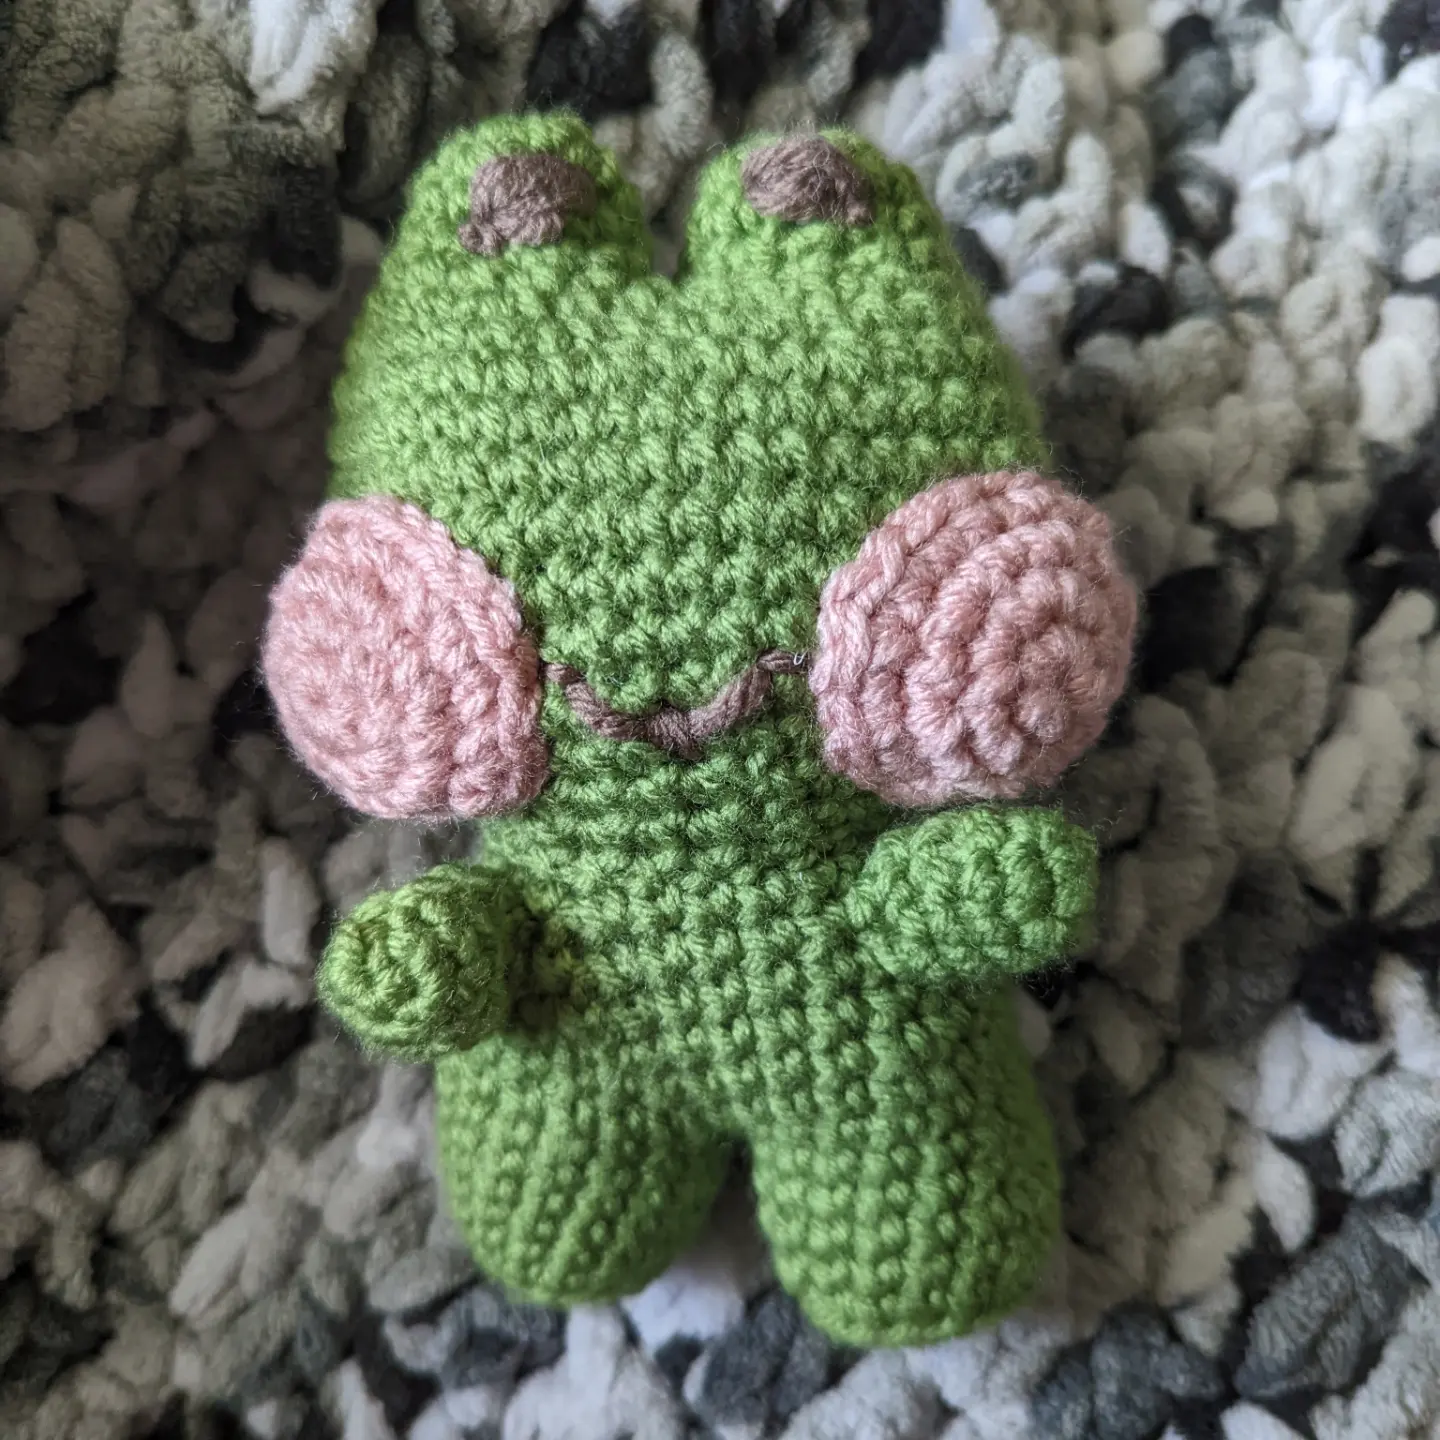 Crochet Frog with Pink Cheeks